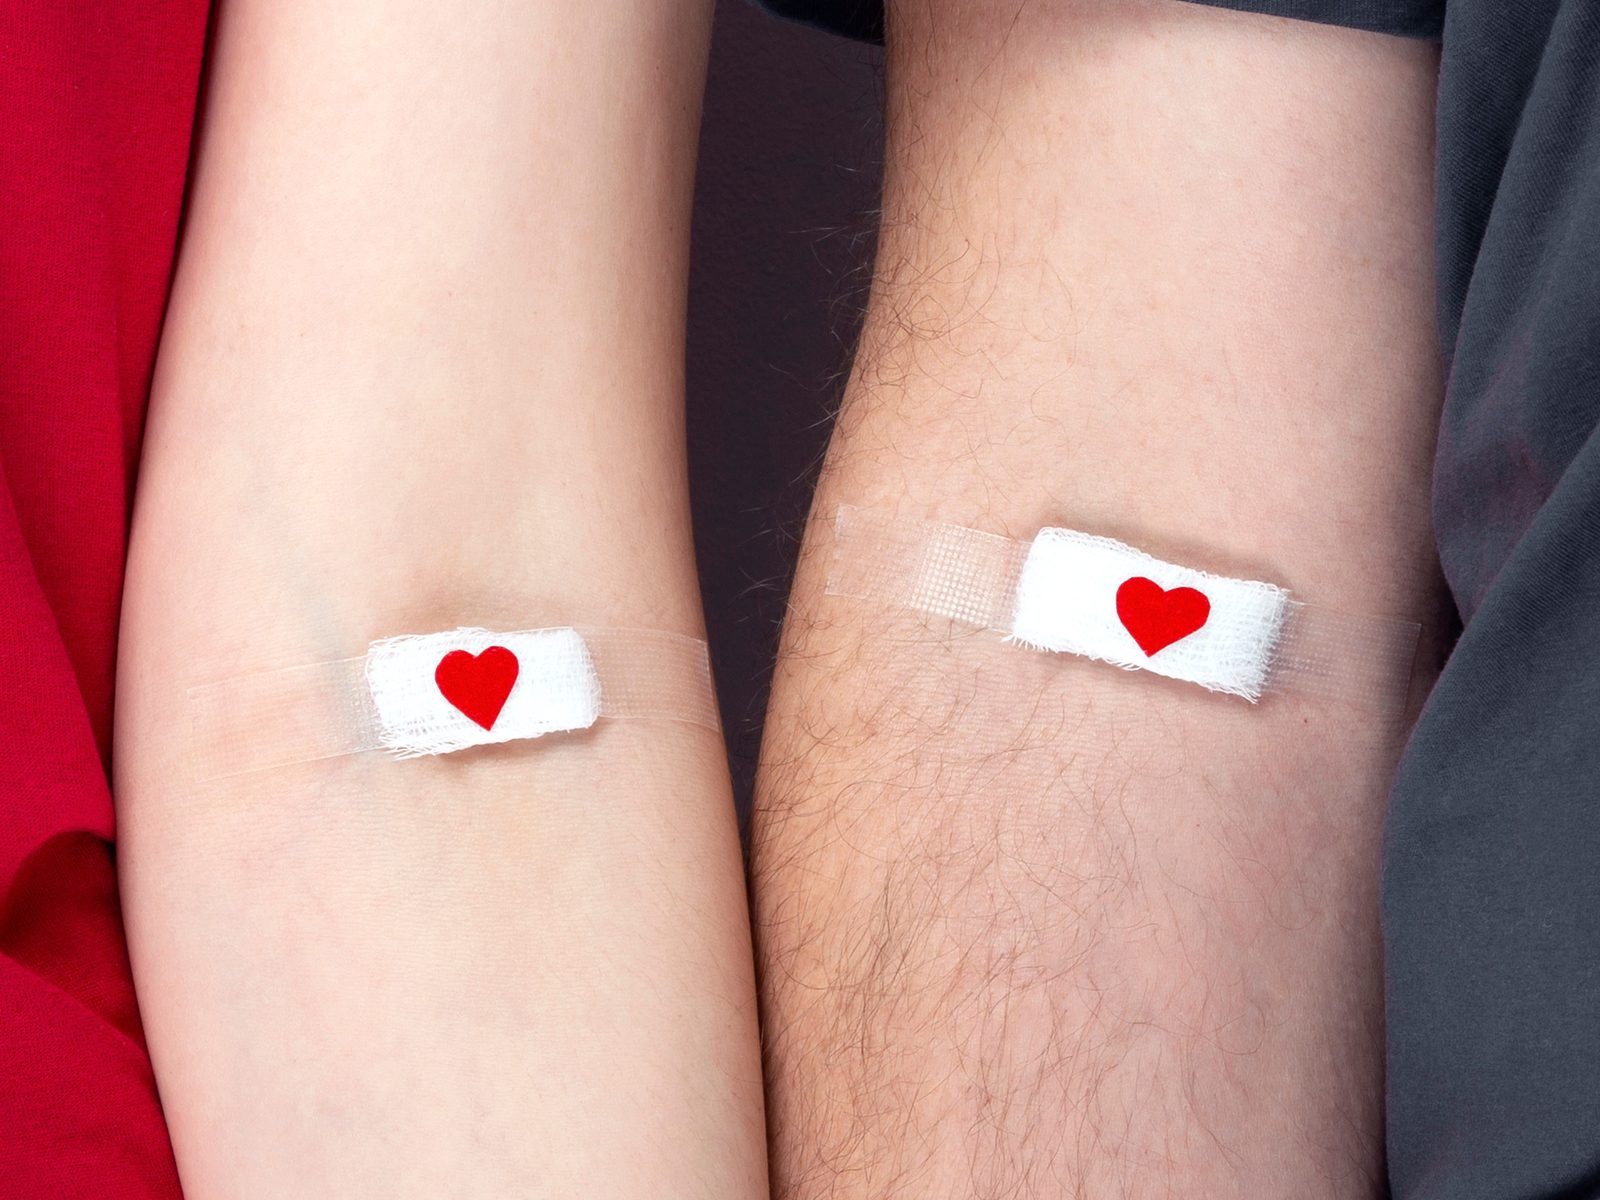 New York Blood Center - Got tats? GIVE BLOOD! Many people with tattoos  donate. The deferral period for being eligible to donate depends on when  and where you received your tattoo. You